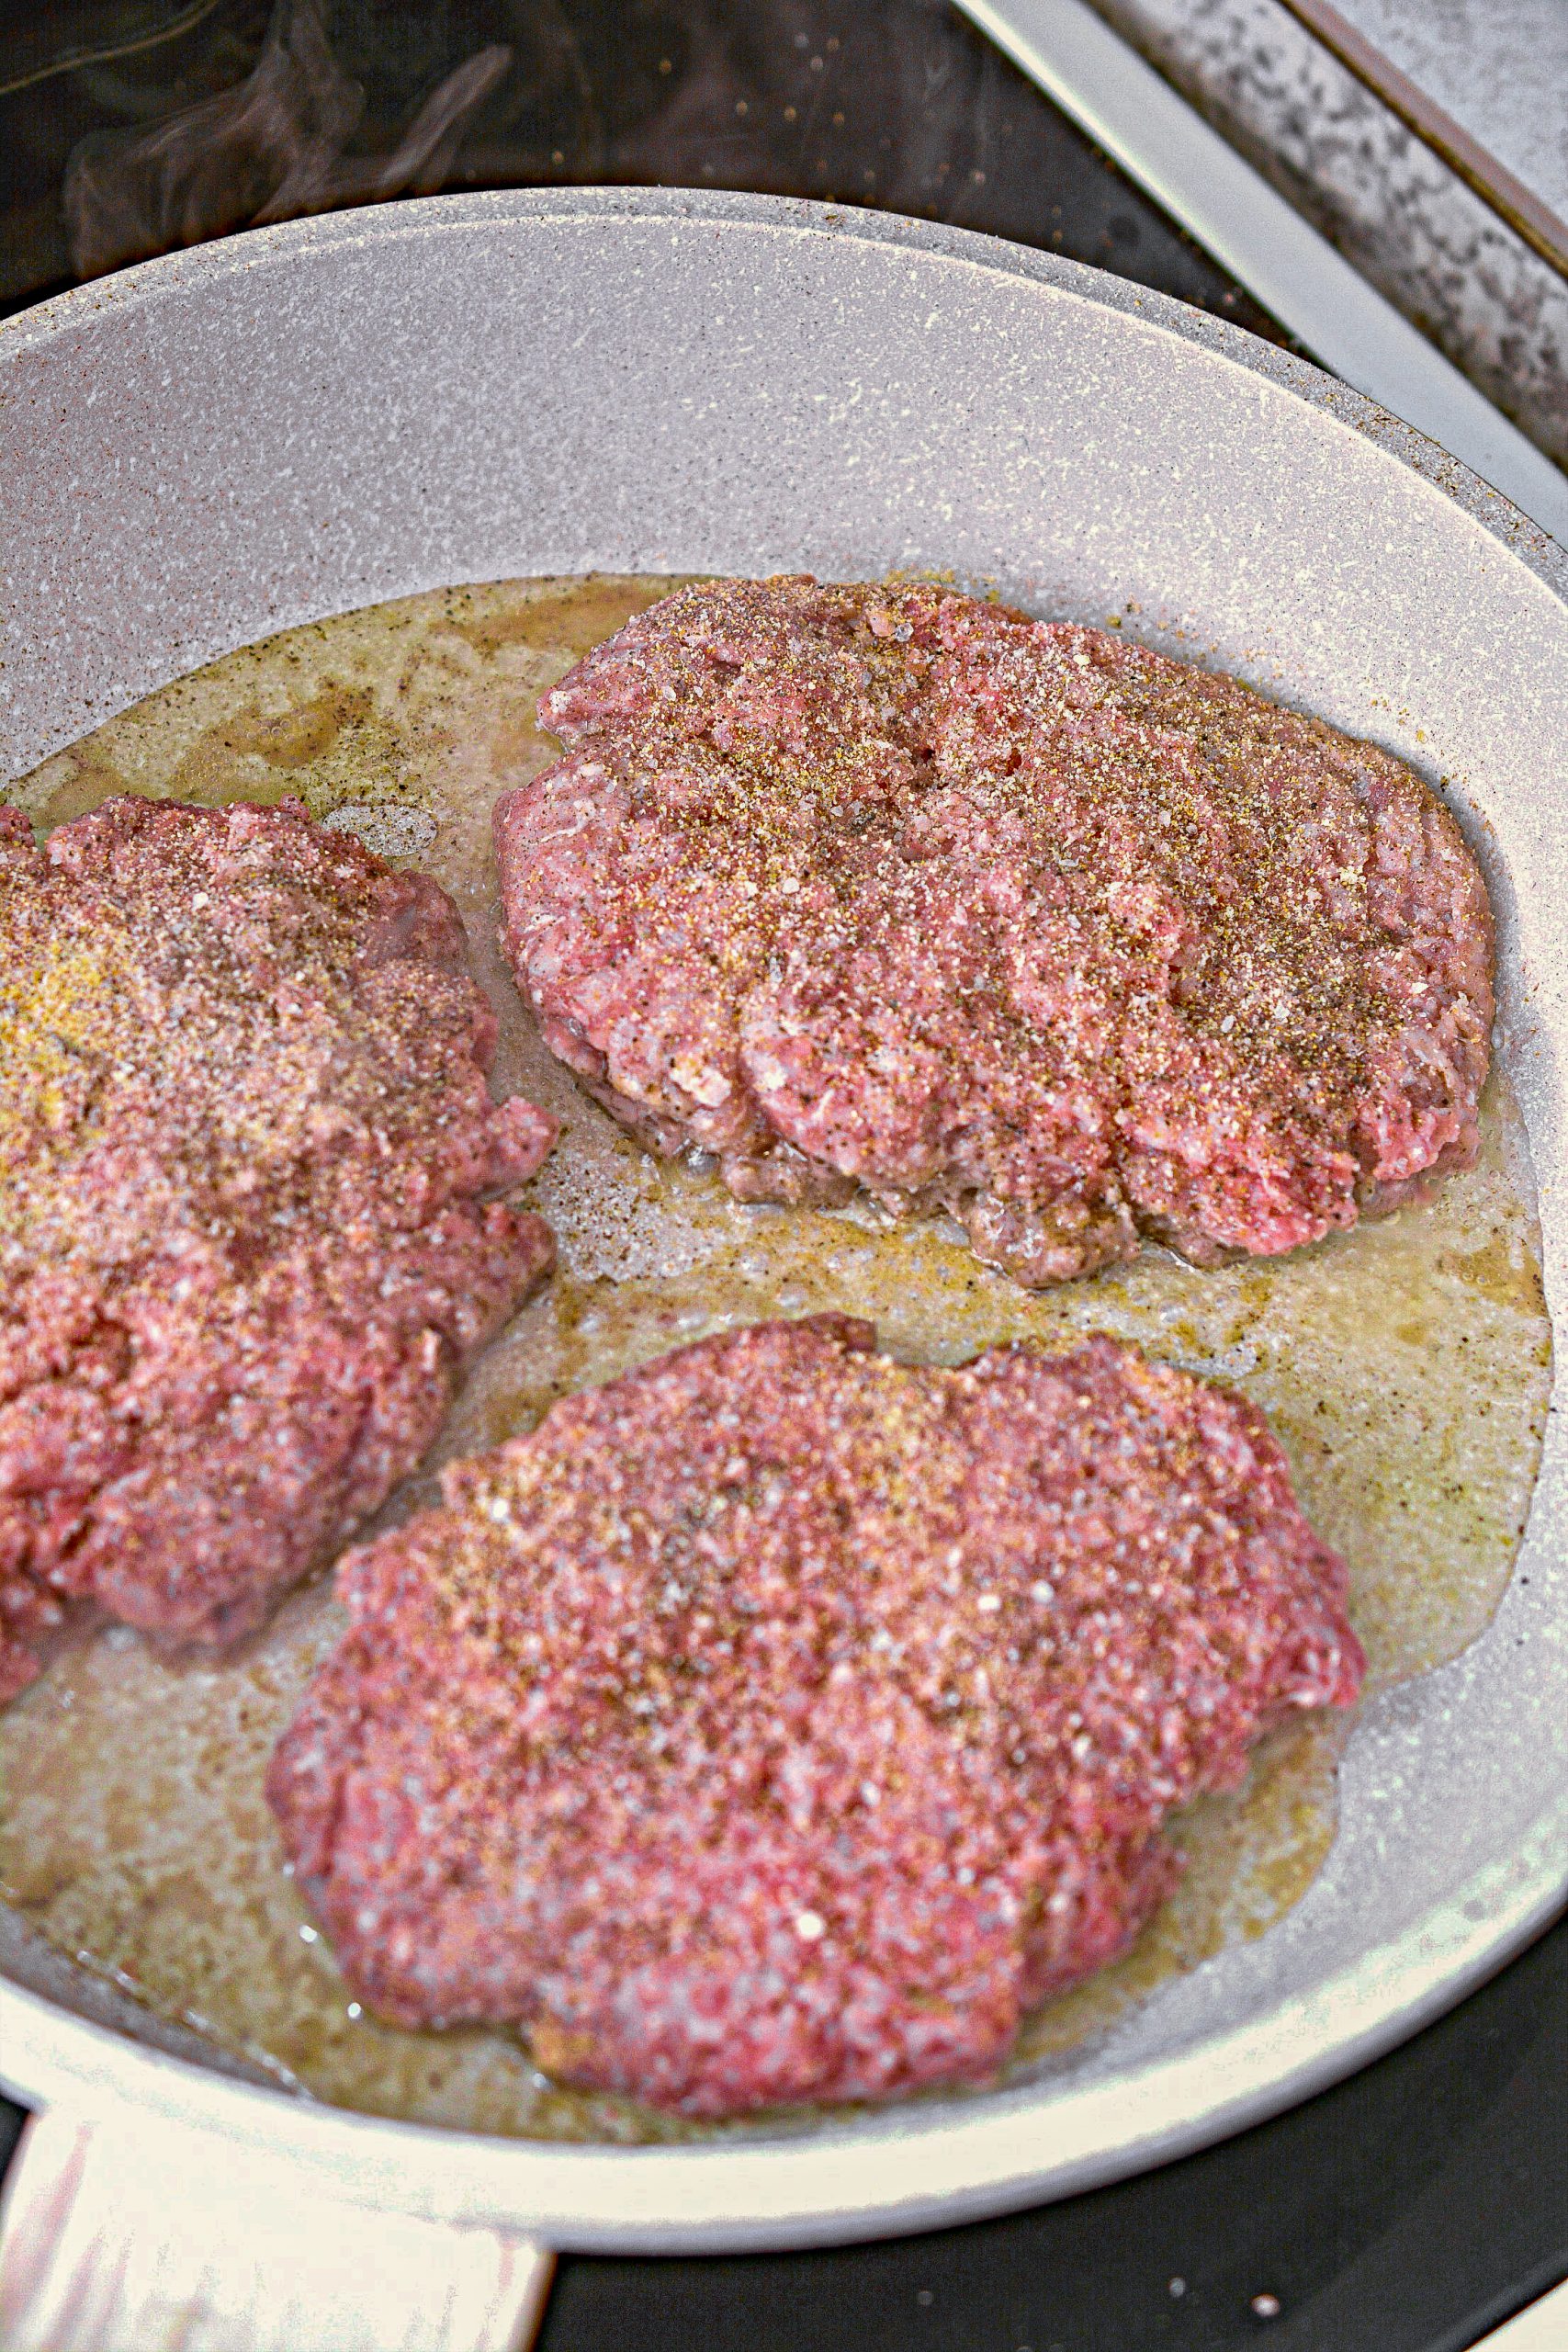 Season the meat on both sides with onion powder, garlic powder, and salt and pepper to taste.